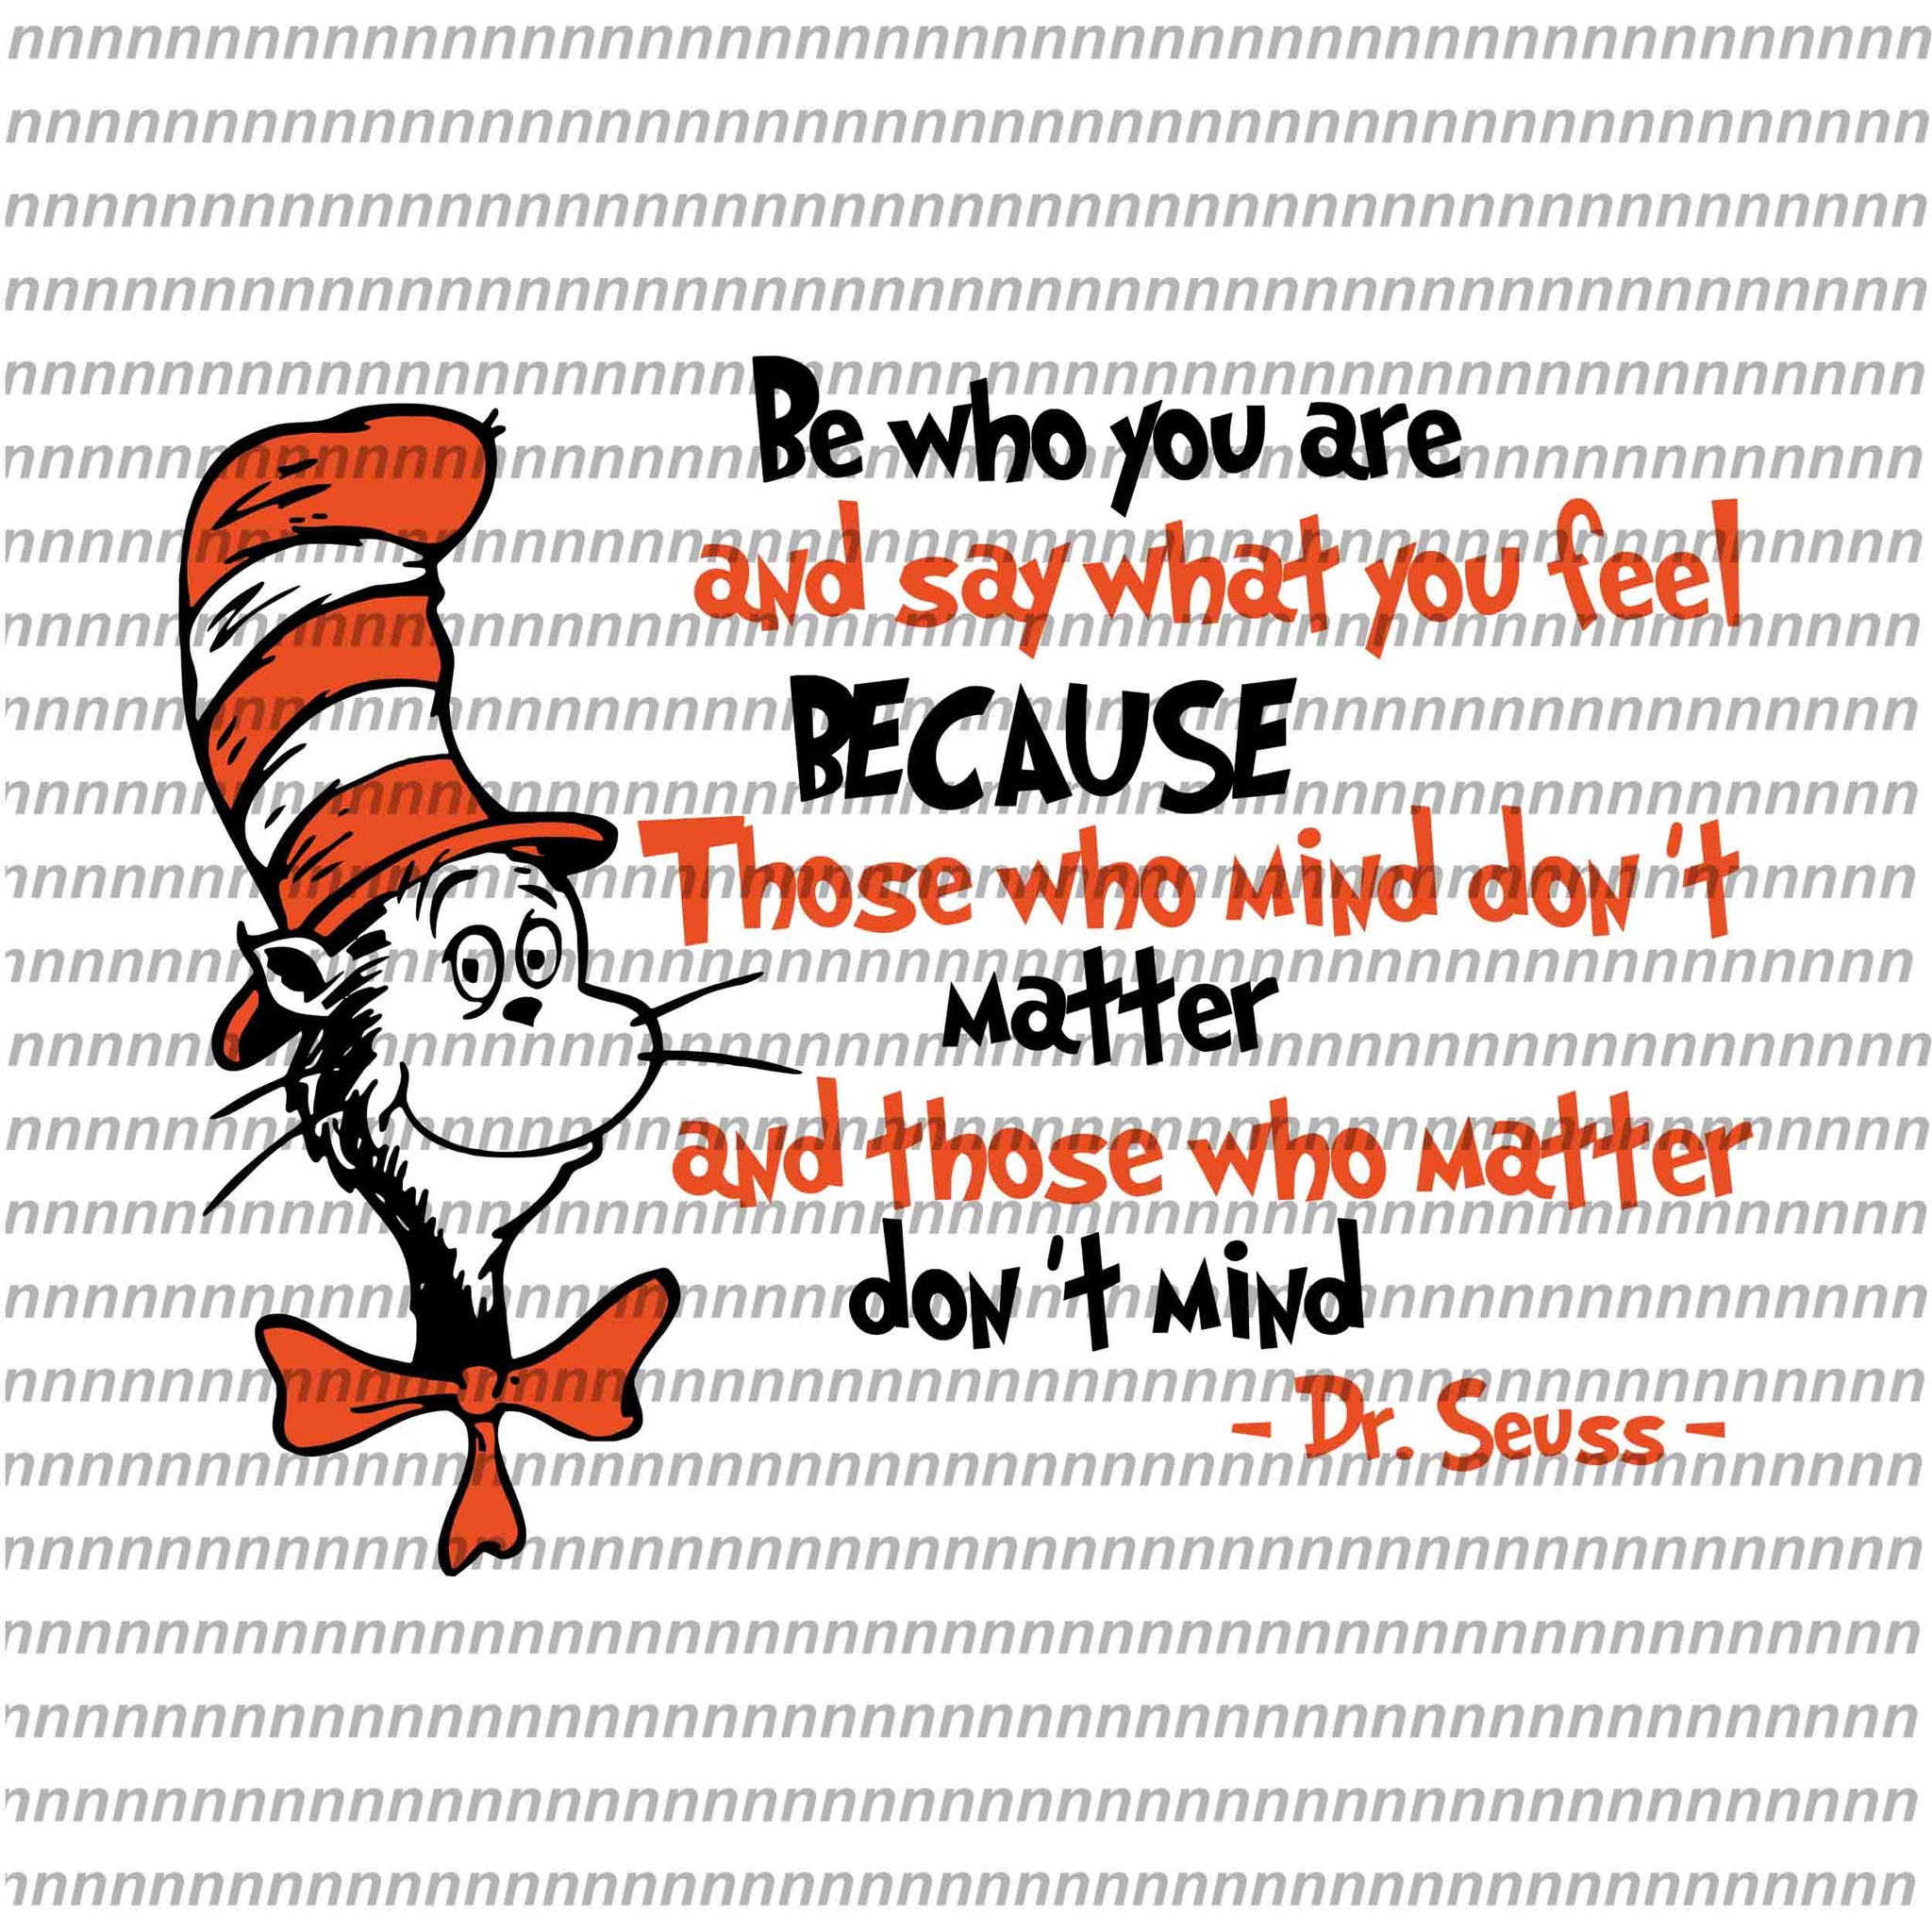 Be who you are and say what you feel, Dr Seuss svg, Dr Seuss vector,Dr Seuss quote, Dr Seuss design, Cat in the hat svg, thing 1 thing 2 thing 3, svg, png, dxf, eps file